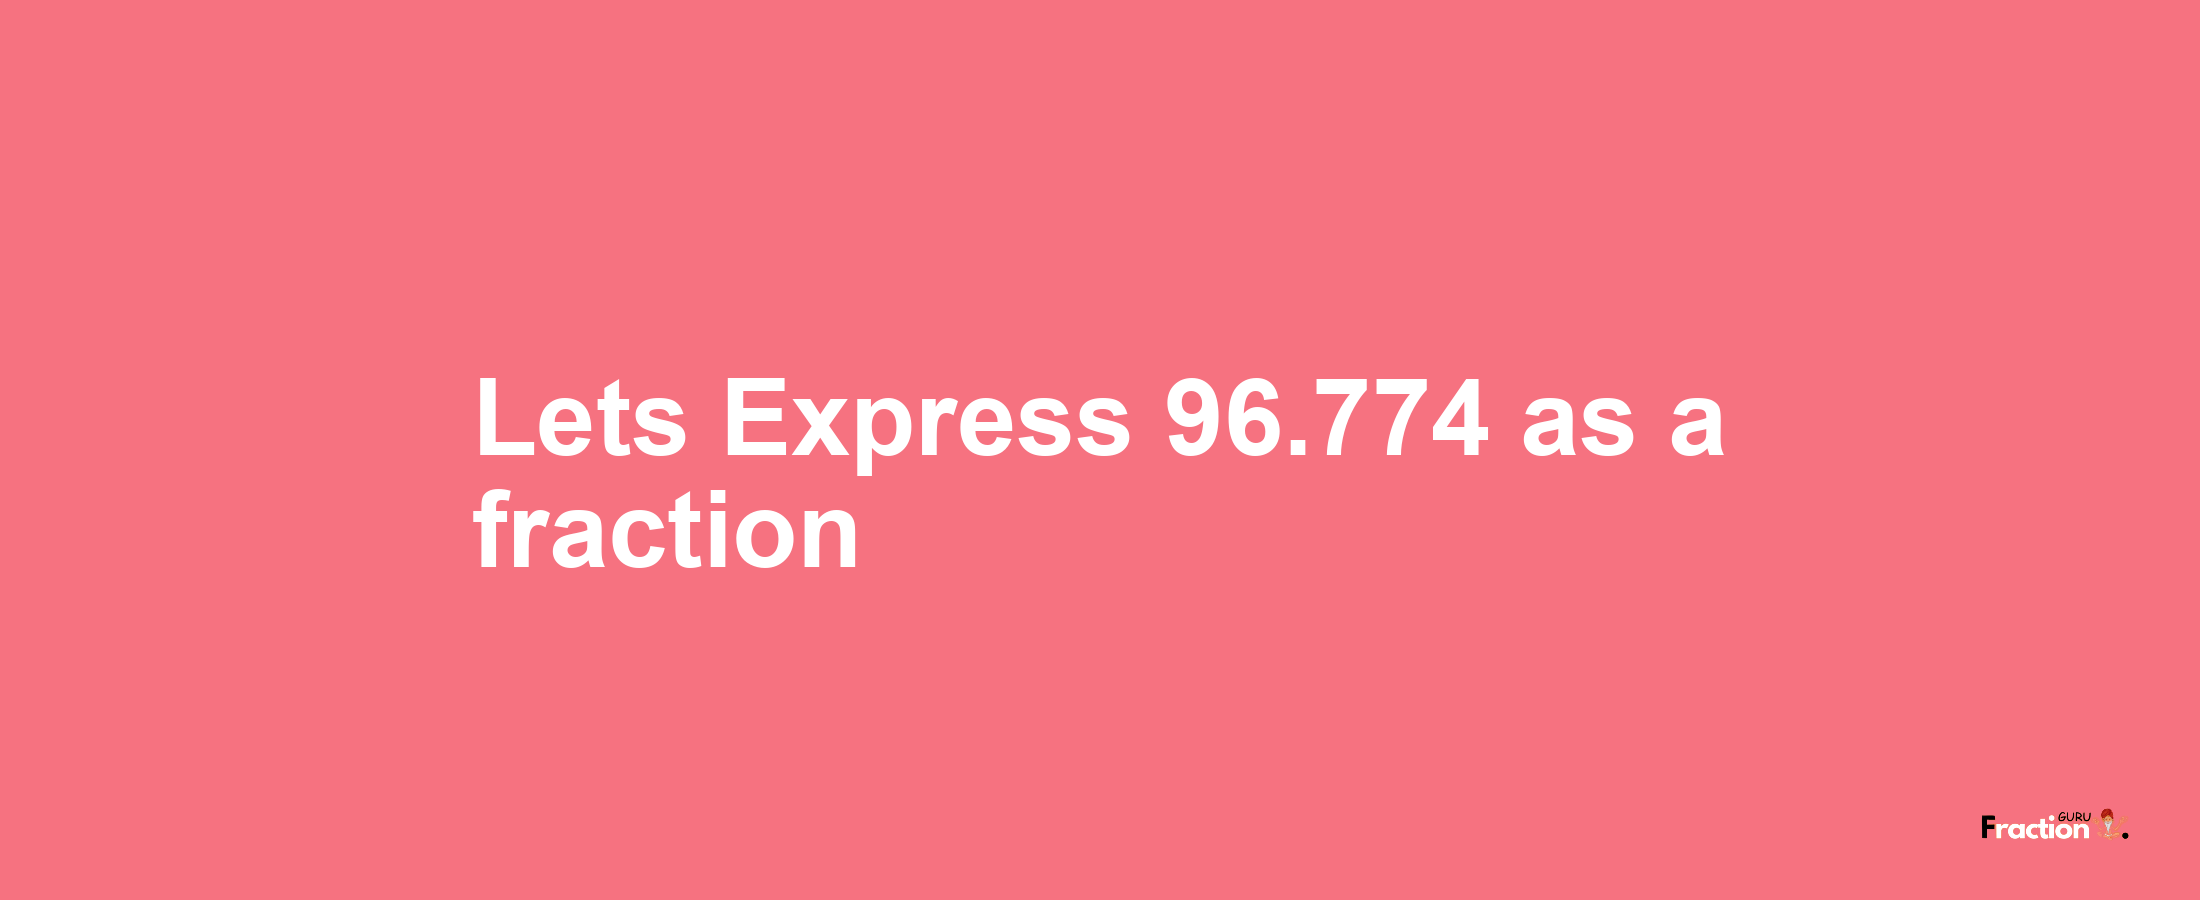 Lets Express 96.774 as afraction